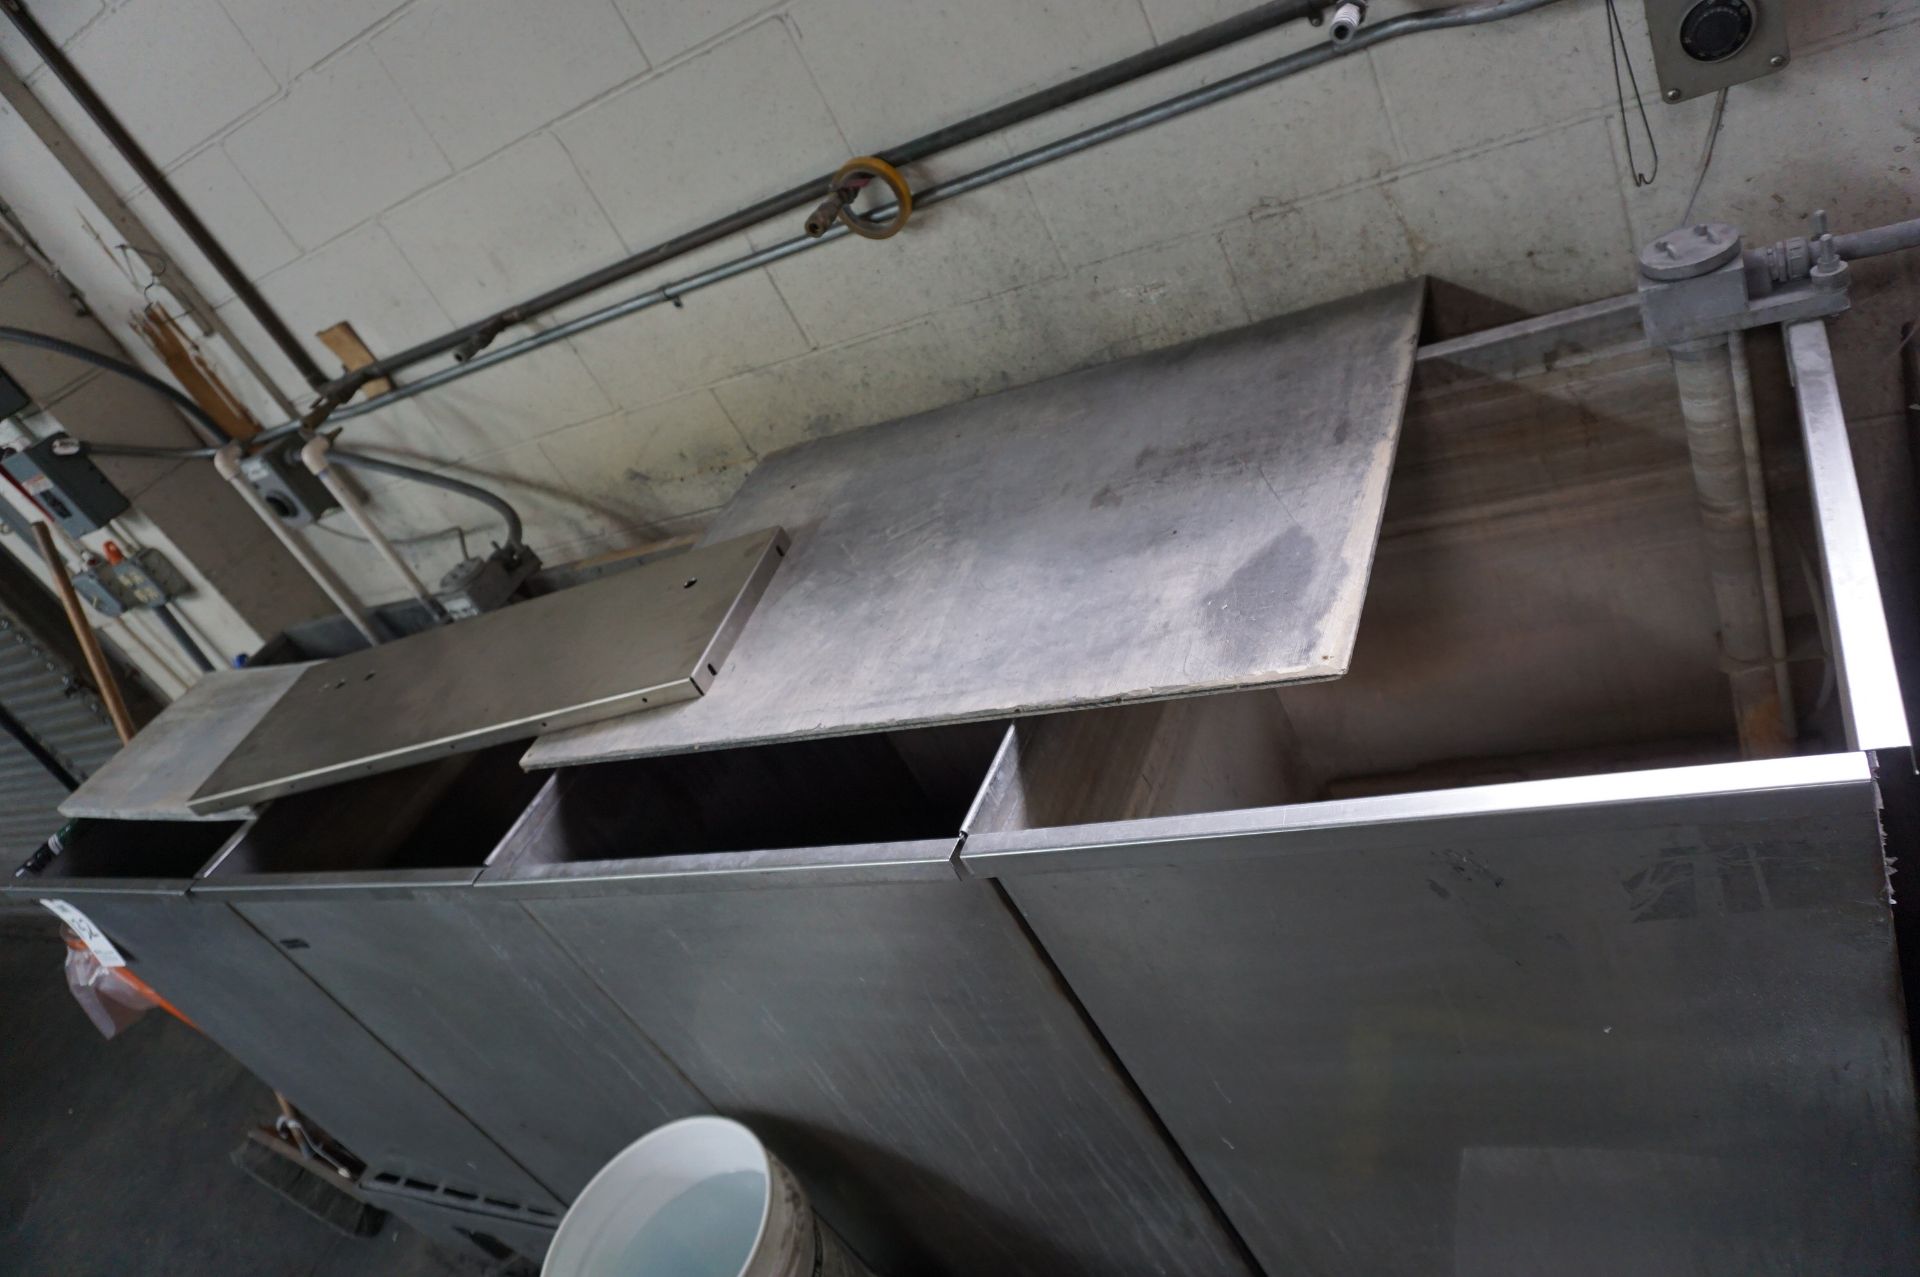 4 CONTAINER STAINLESS STEEL CLEANING AND FINISHING STATION FOR POWDER COATING, (4) STAINLESS STEEL - Image 4 of 7